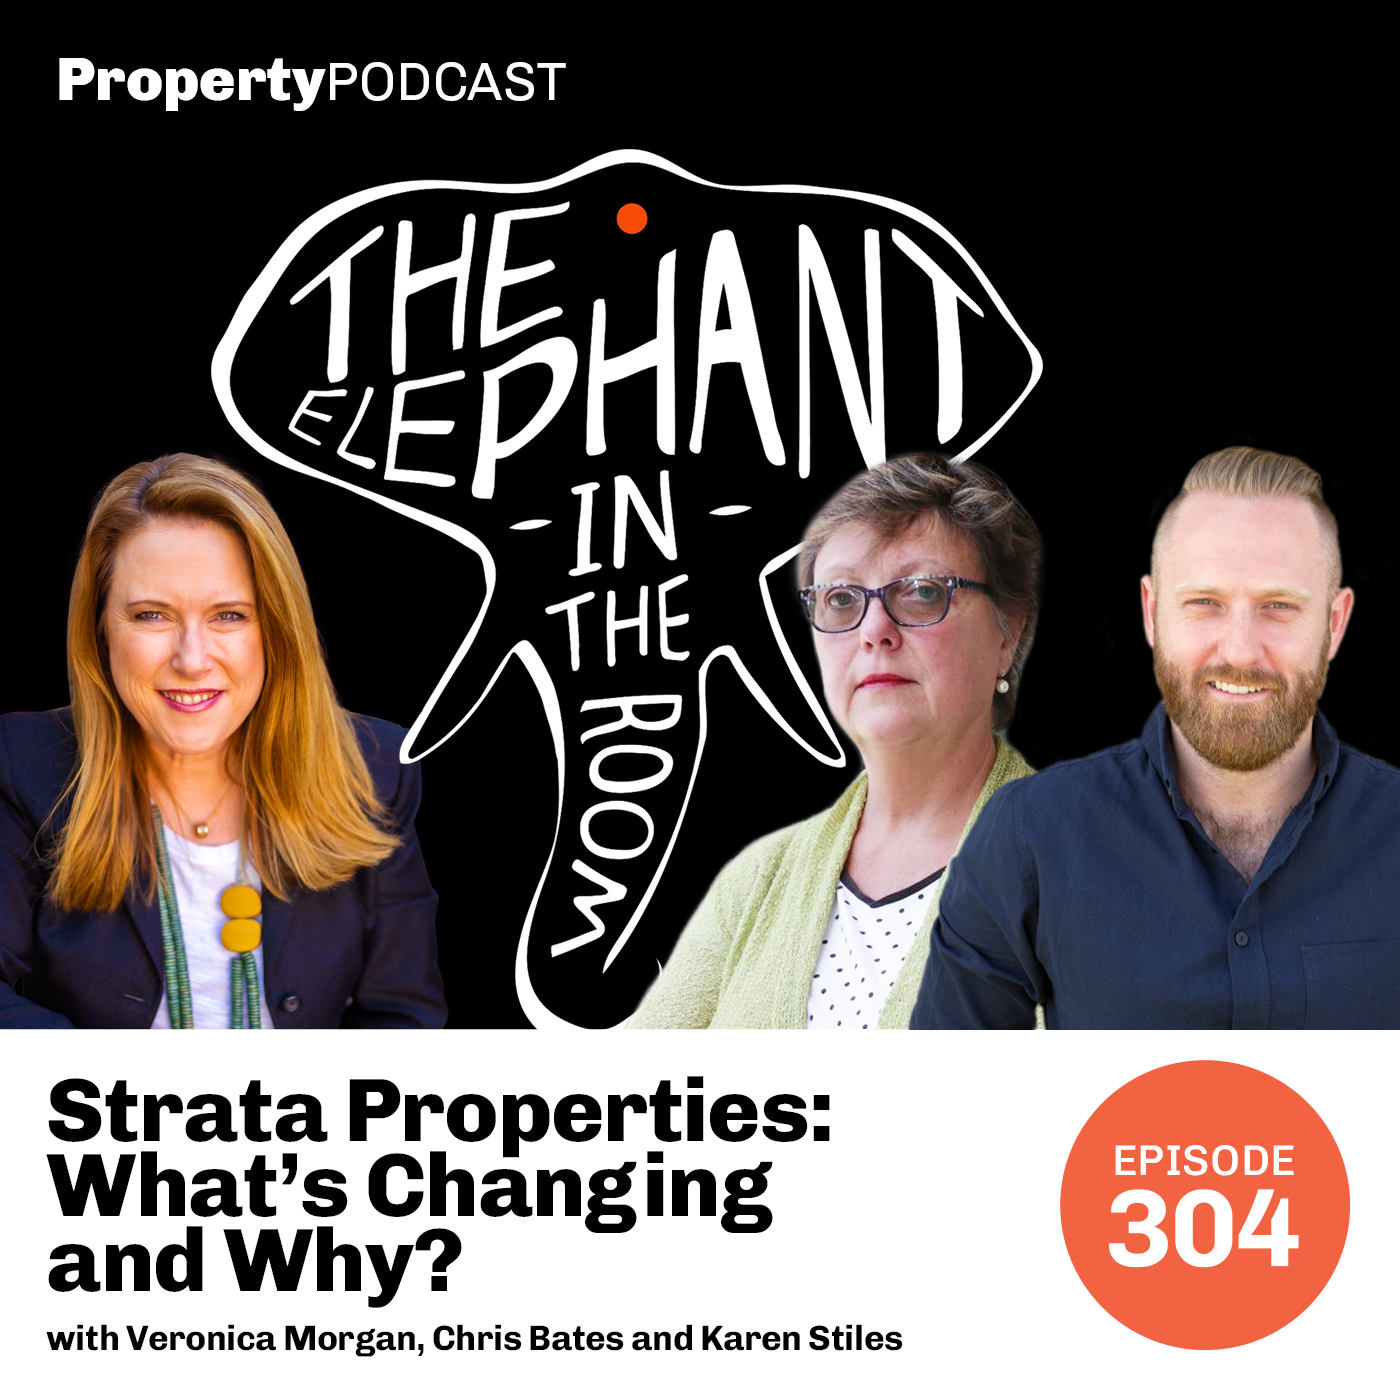 Strata Properties: What’s Changing and Why?